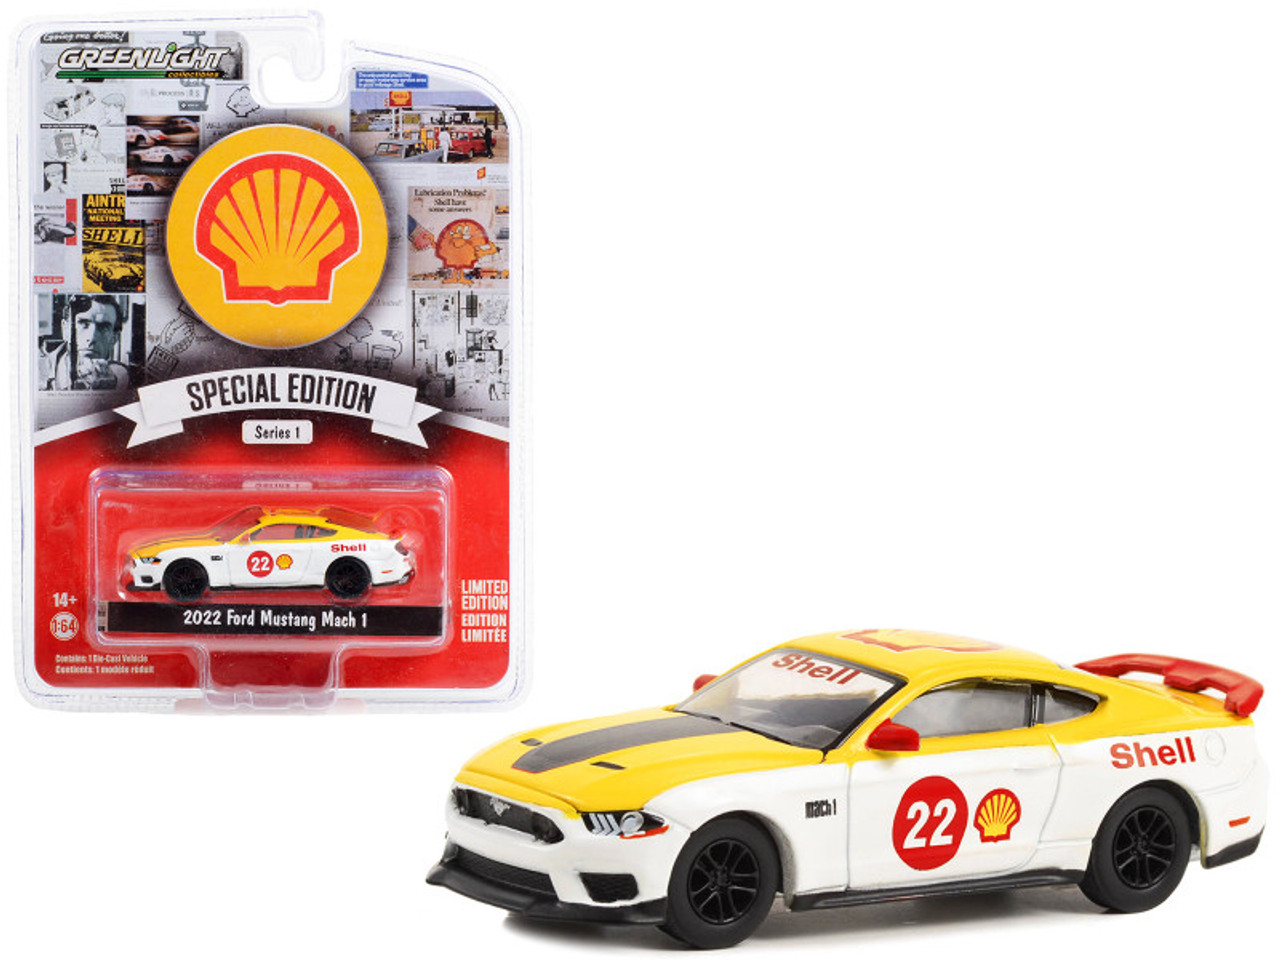 2022 Ford Mustang Mach 1 #22 Yellow and White "Shell Racing" "Shell Oil Special Edition" Series 1 1/64 Diecast Model Car by Greenlight